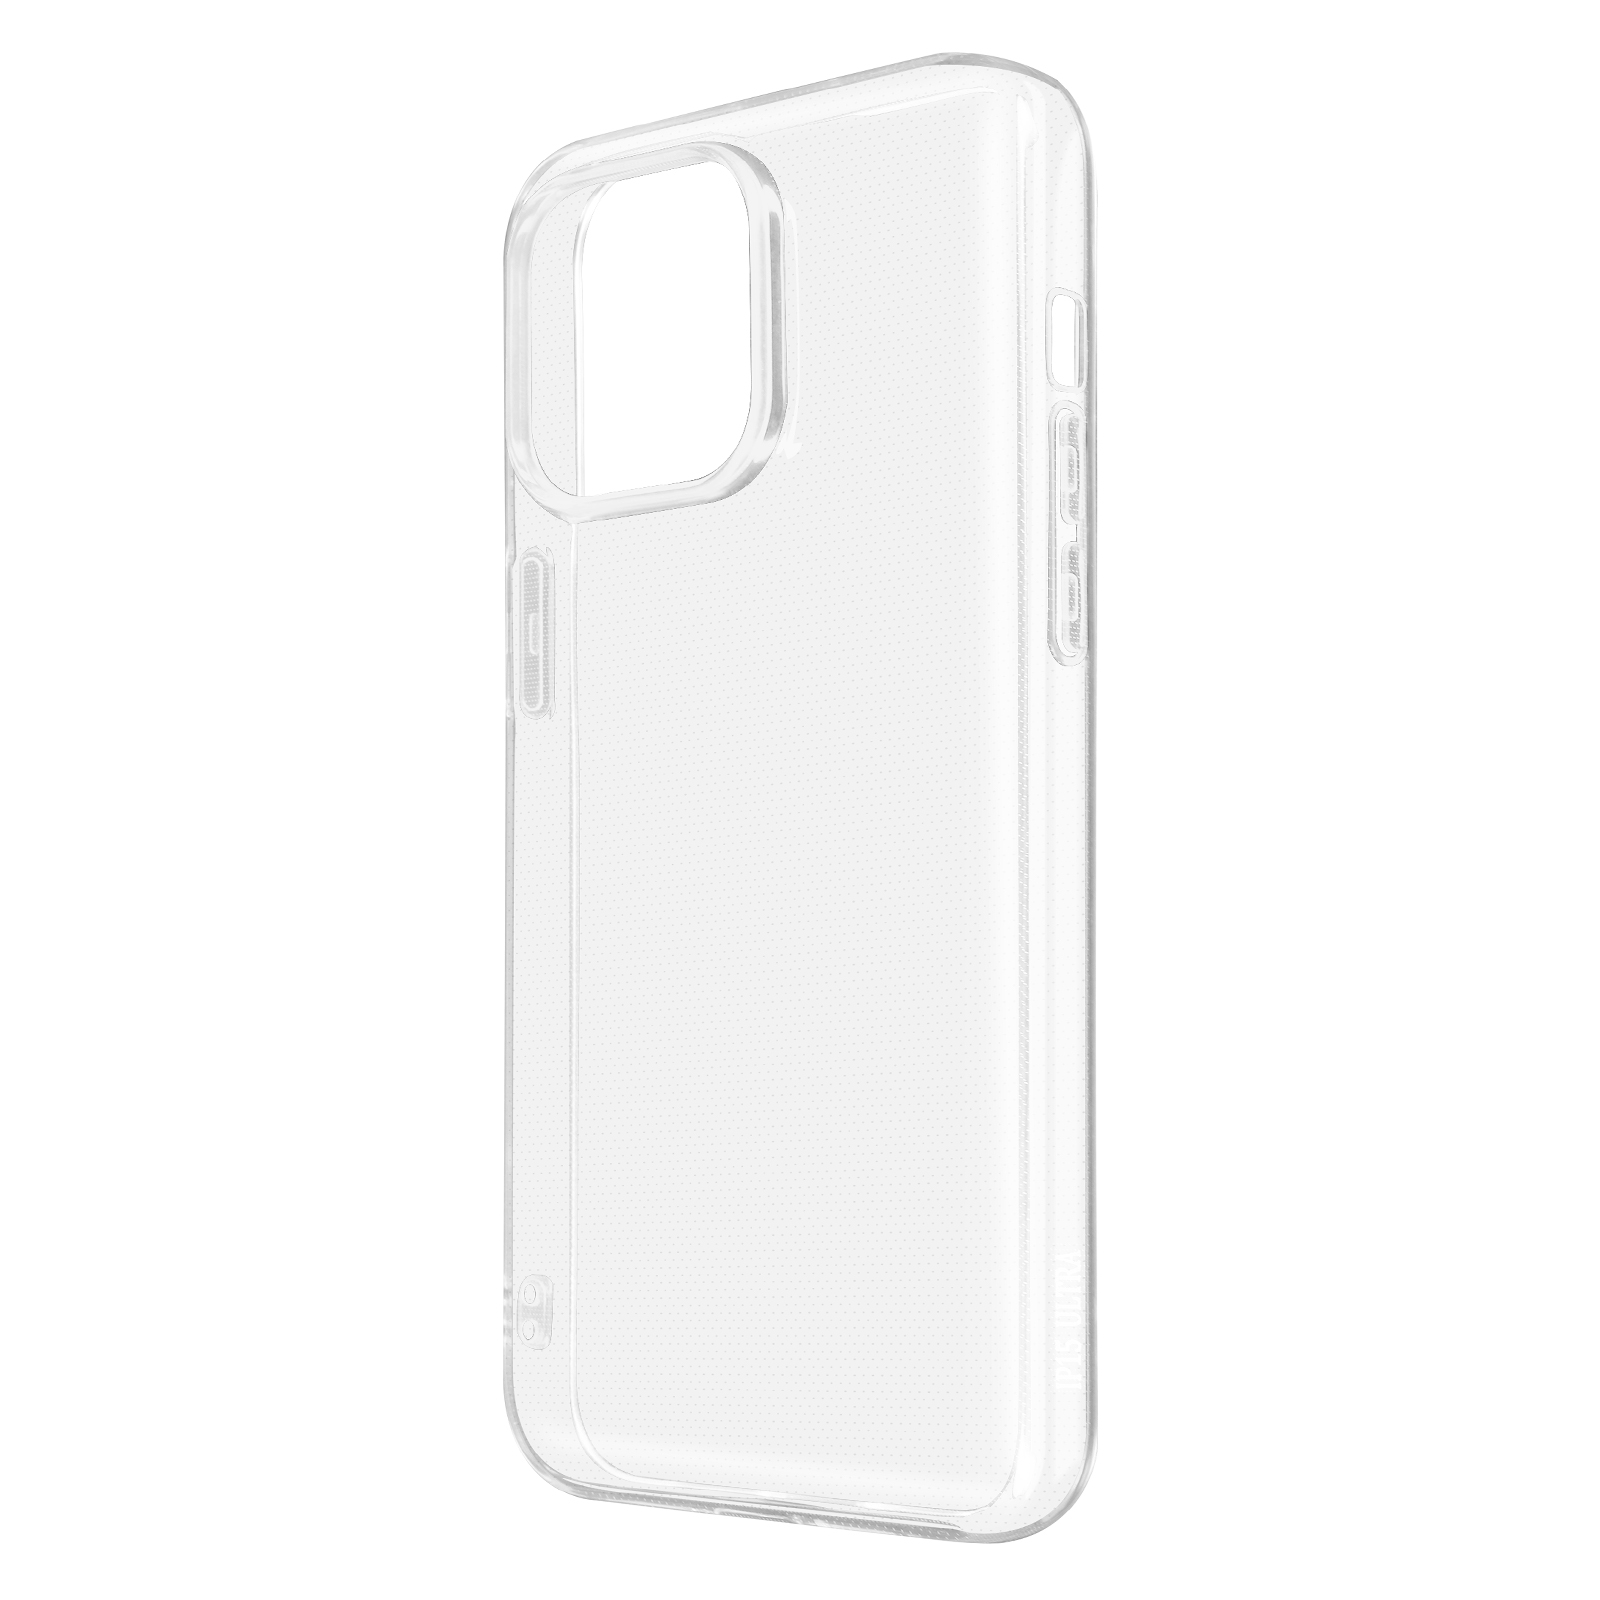 AVIZAR Classic Case Series, Backcover, Max, Transparent 15 iPhone Pro Apple